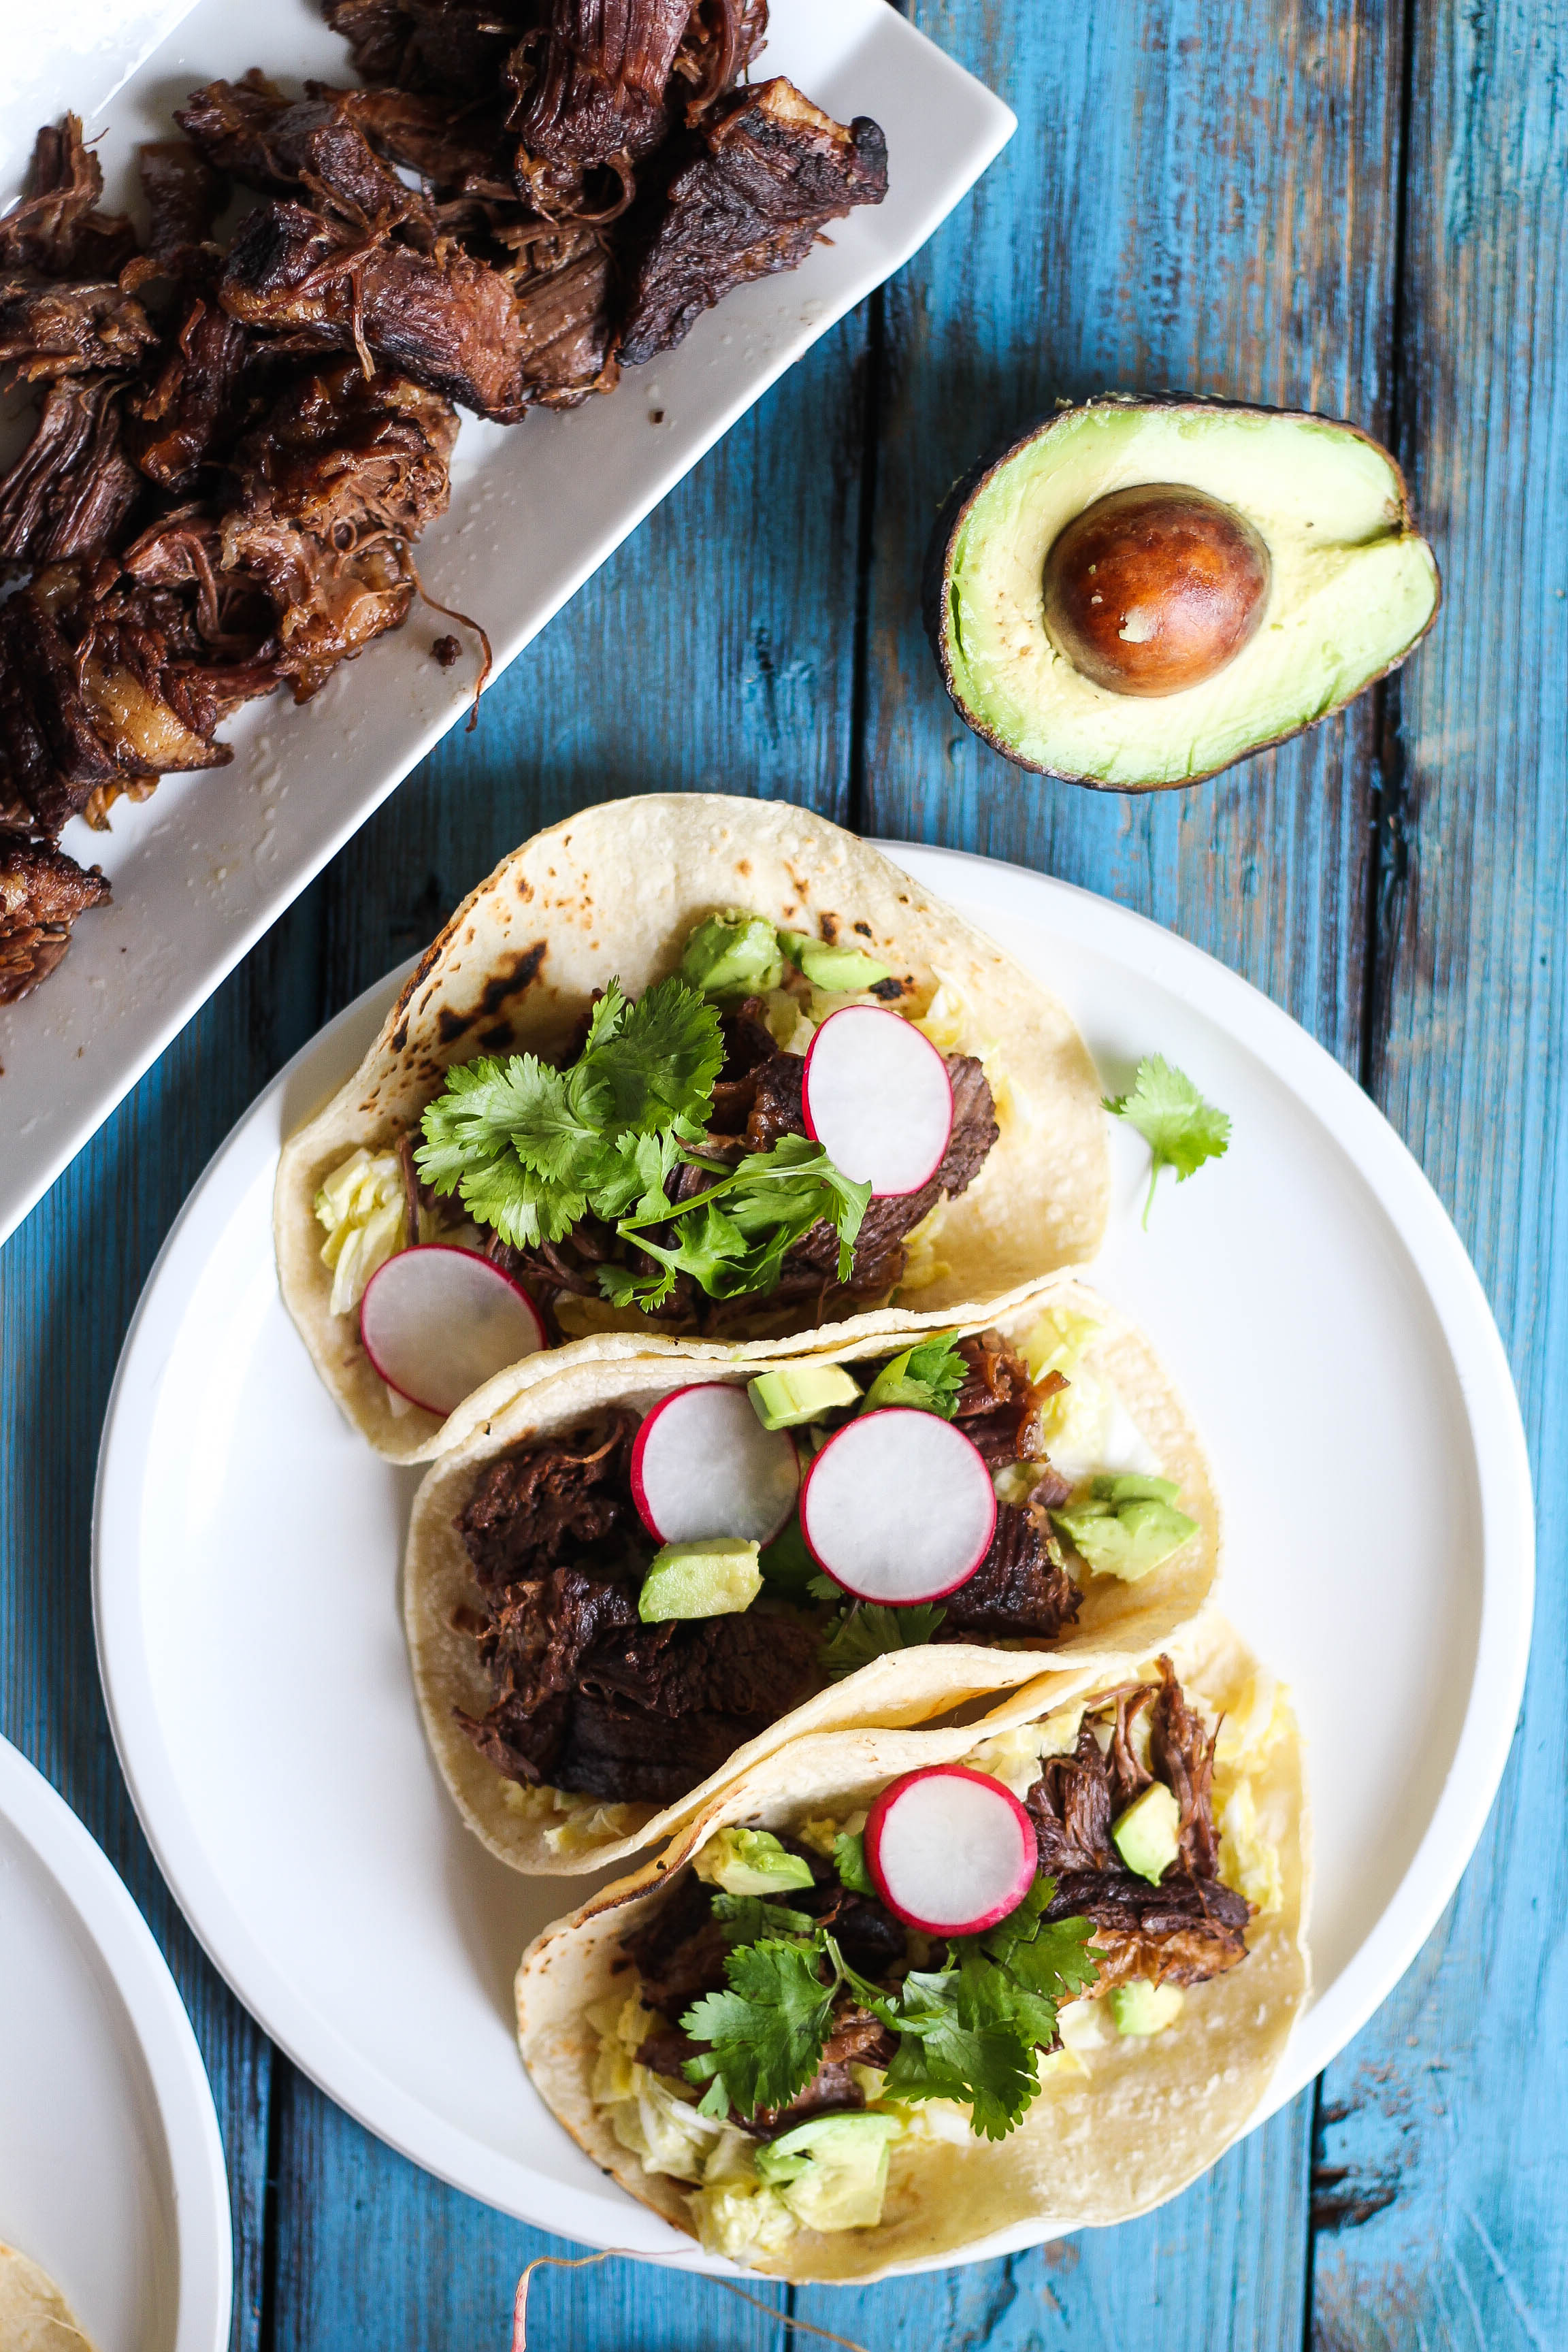 Slow-cooked beef short ribs in an Asian-inspired marinade are a fun twist on a Mexican classic. Enjoy a unique marriage of textures in these simple, wholesome tacos.